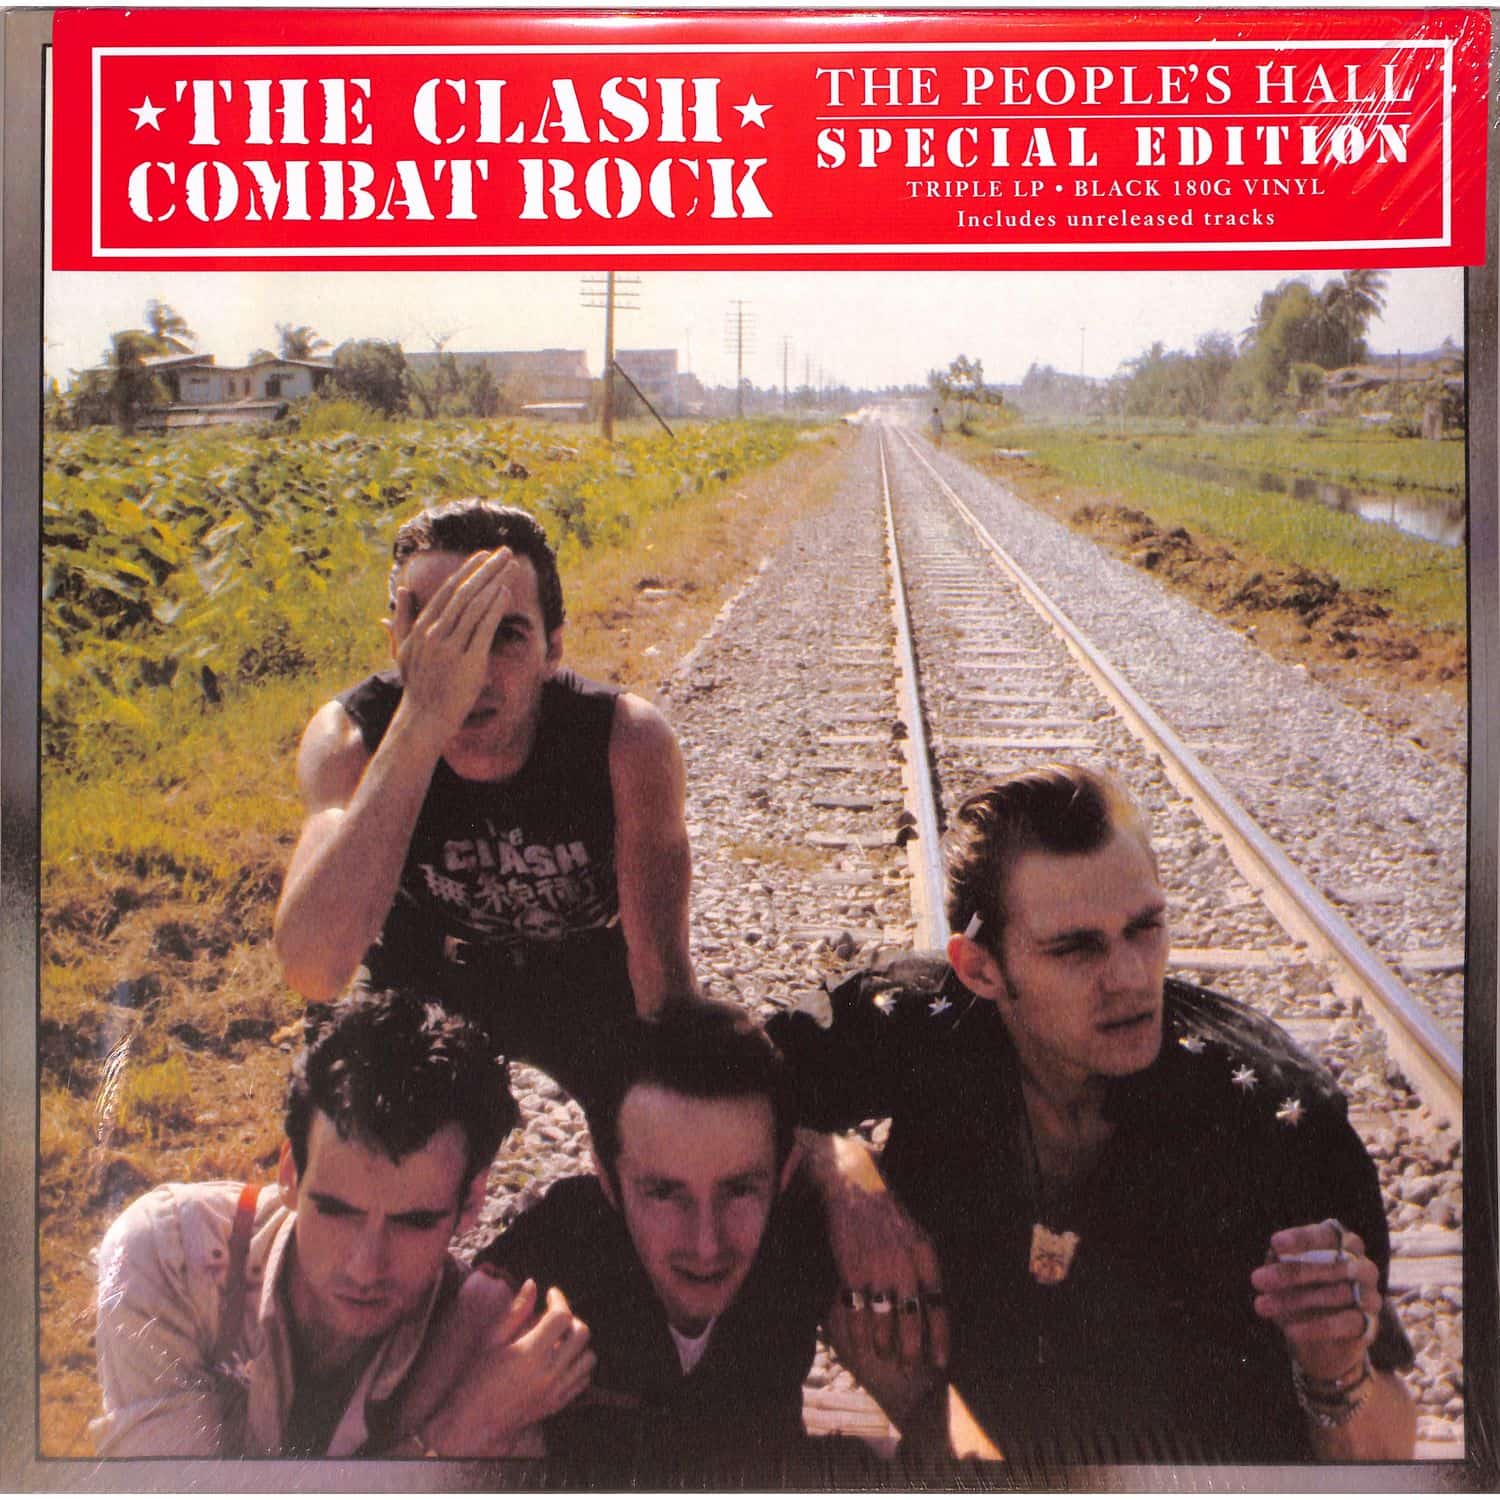 The Clash - COMBAT ROCK - THE PEOPLES HALL EDITION 